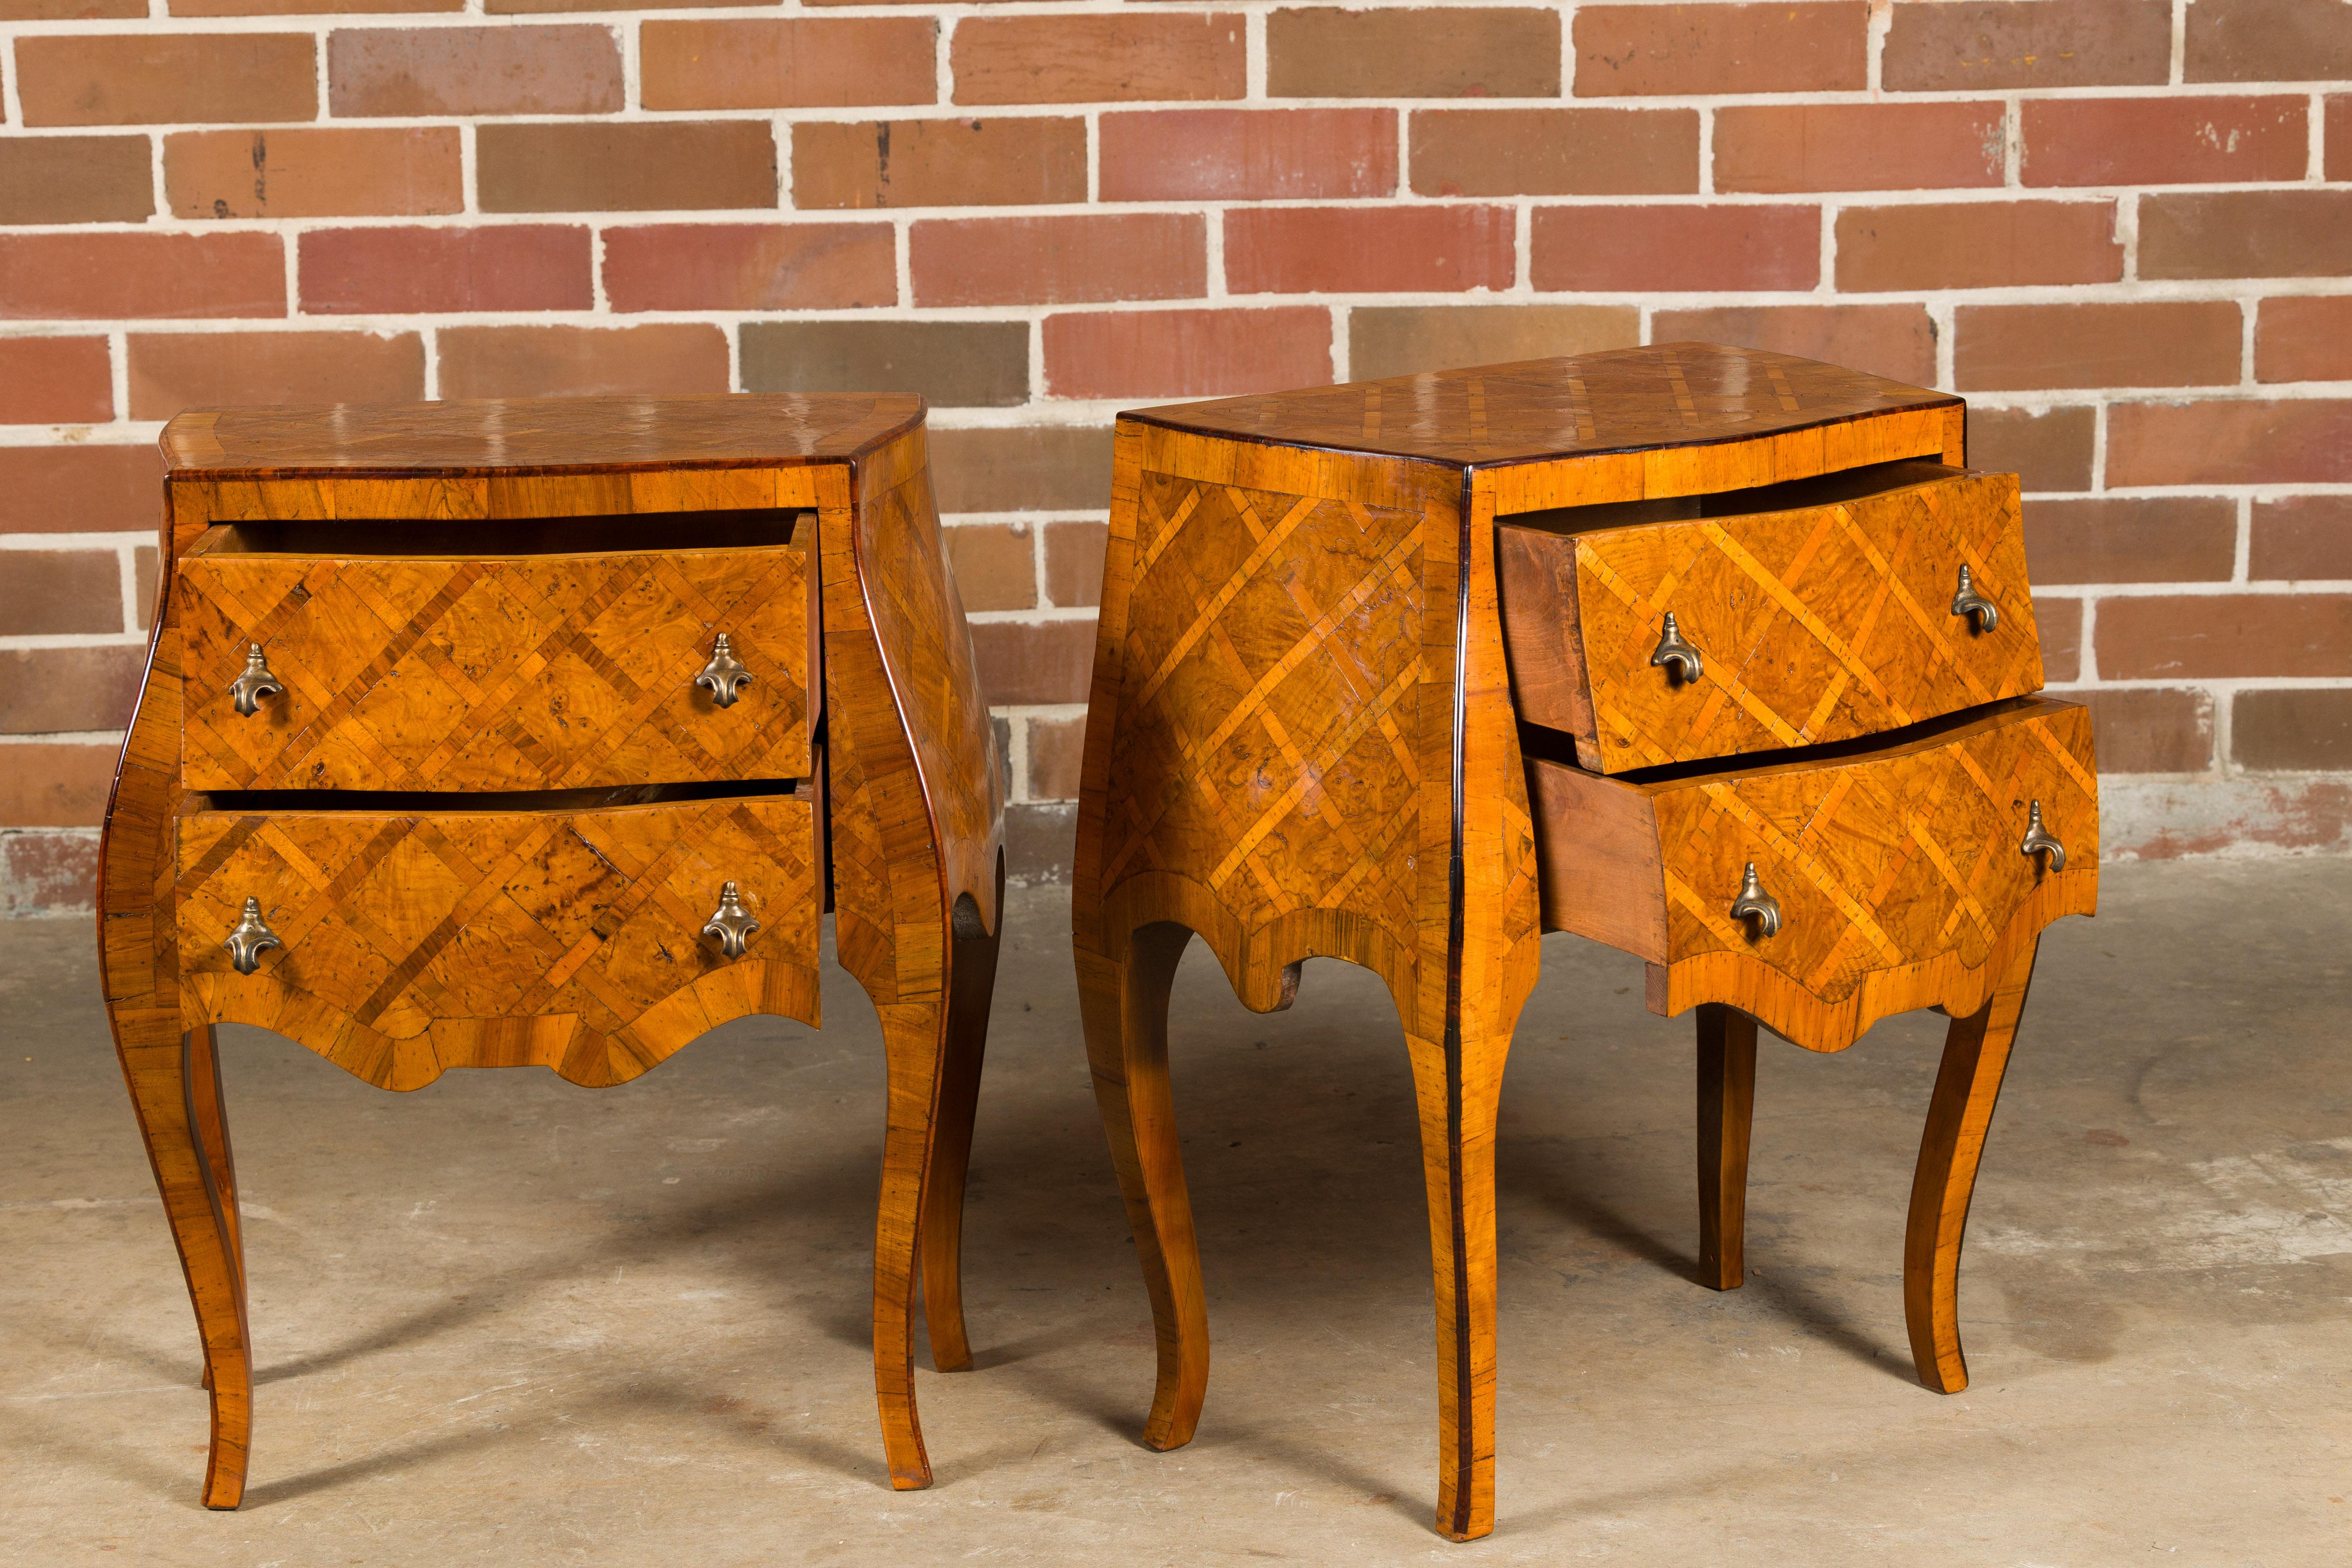 Italian Rococo Style Burl Wood Marquetry Bedside Chests with Cabriole Legs For Sale 10